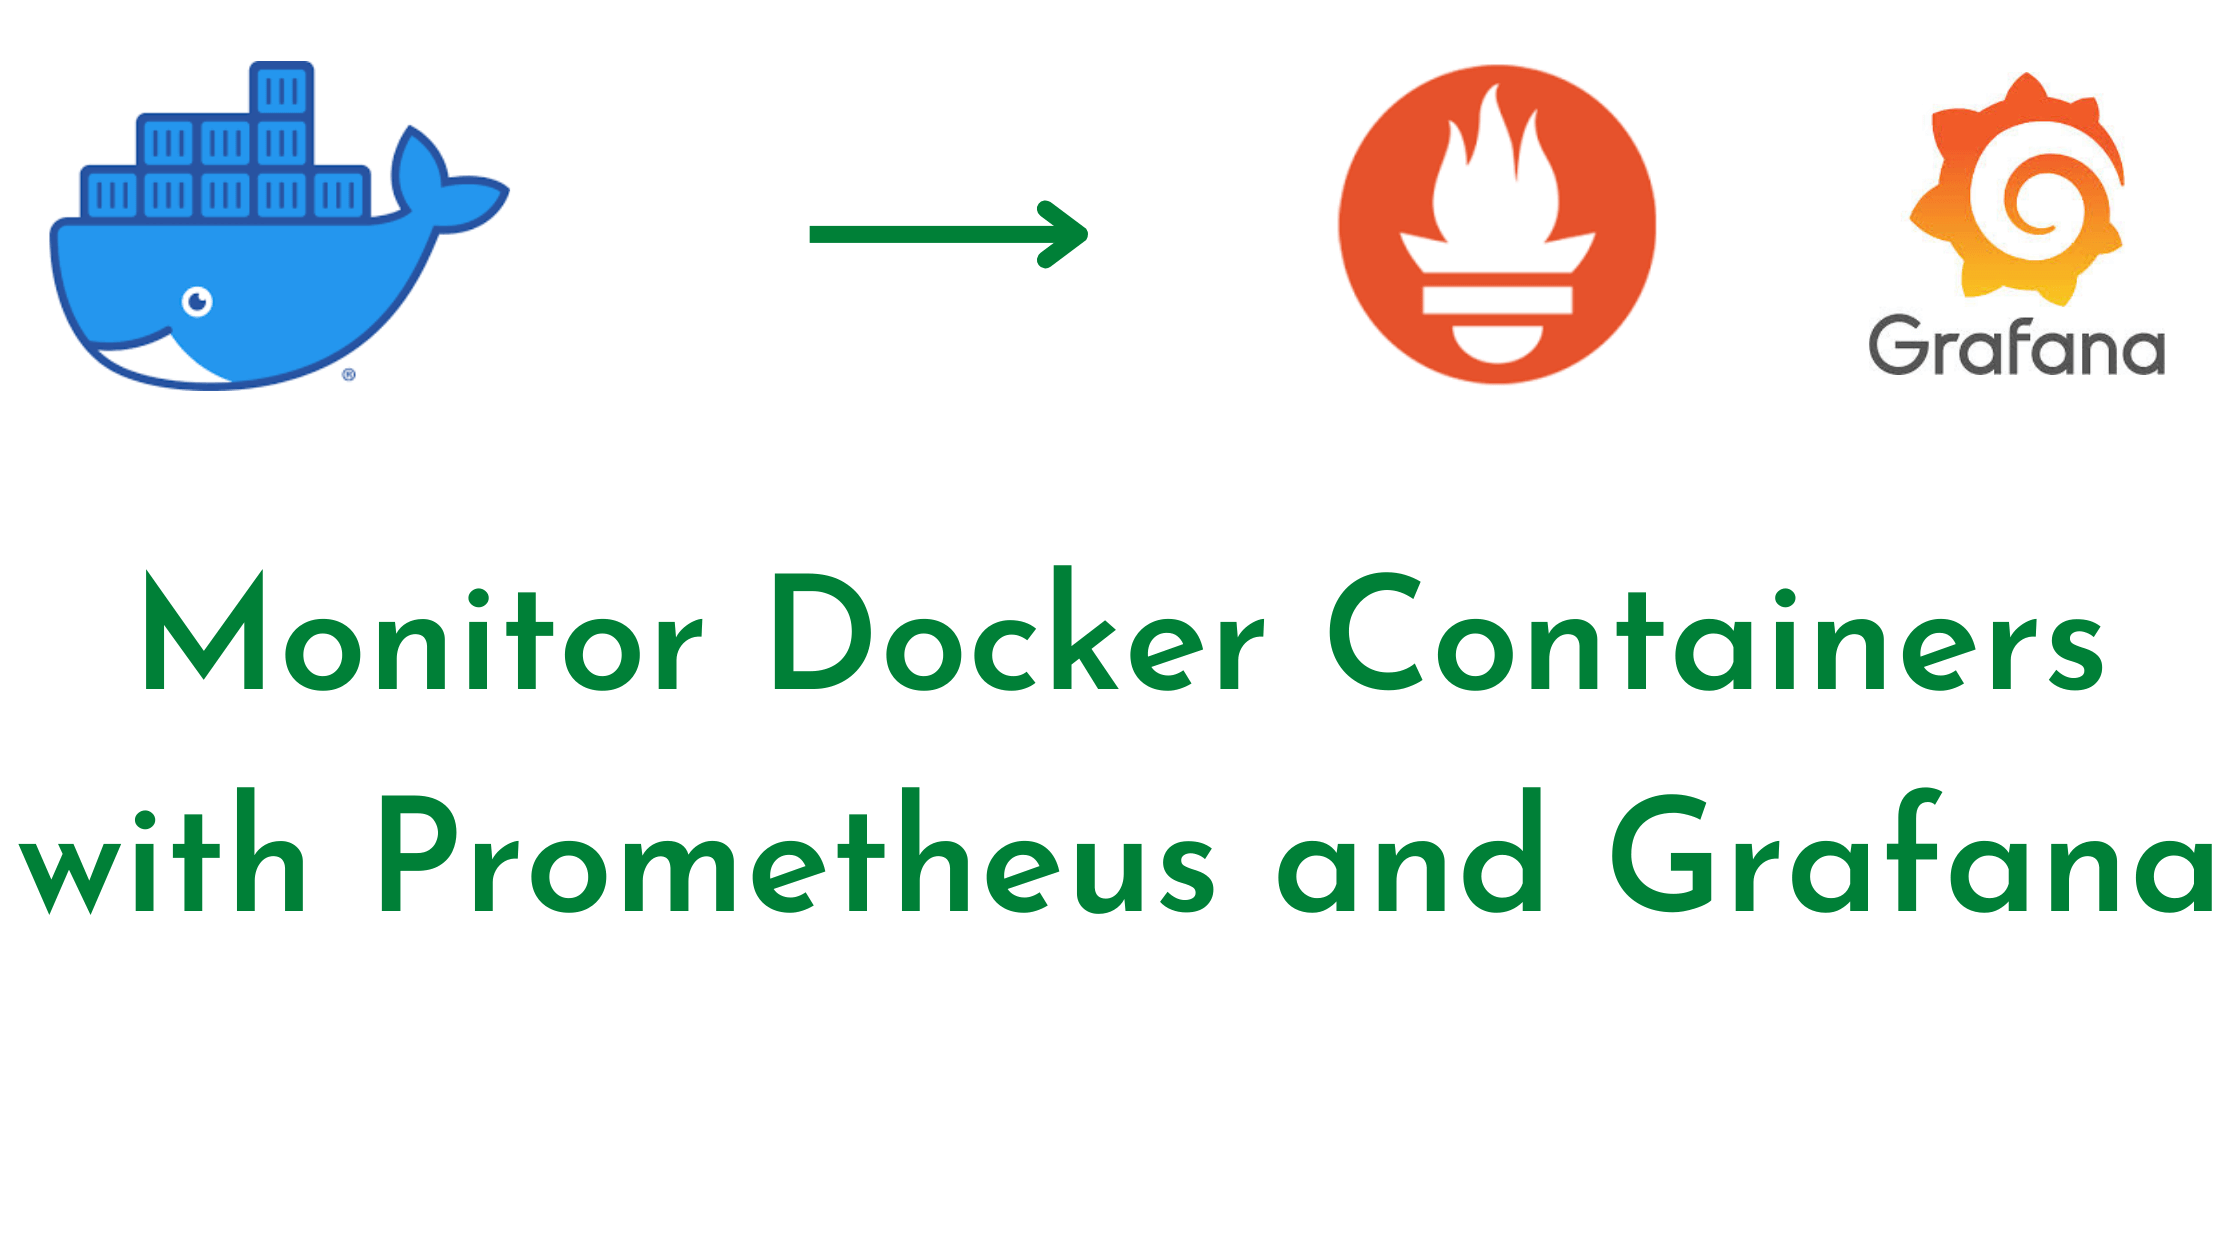 Monitor Docker Containers with Prometheus and Grafana